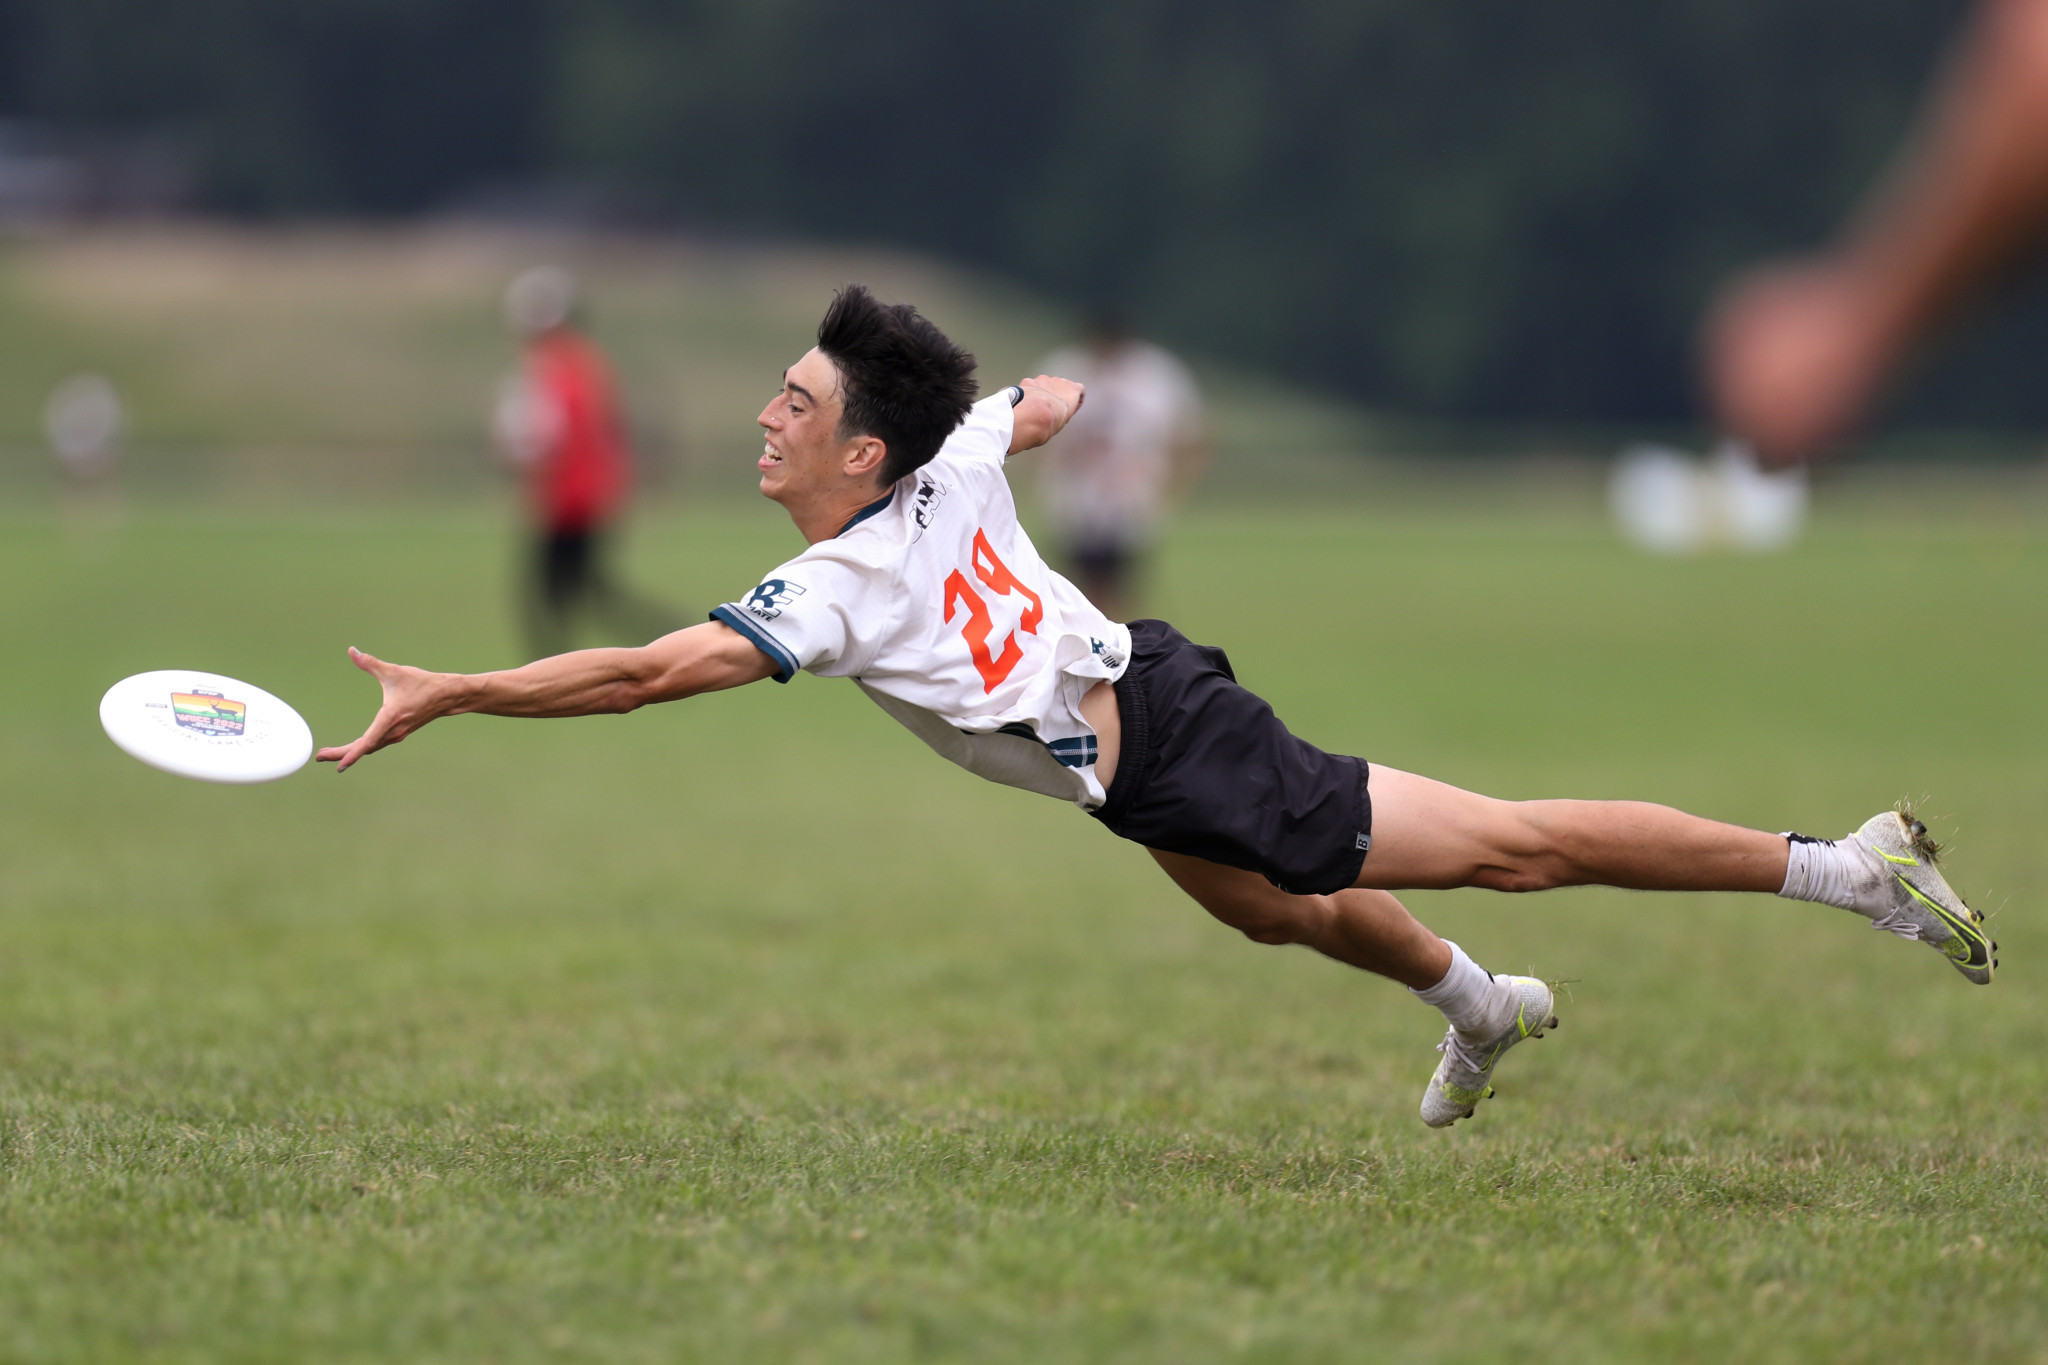 David Sealand of Rhino Slam! attempted to save a possession by diving for the disc ©Paul Rutherford for UltiPhotos